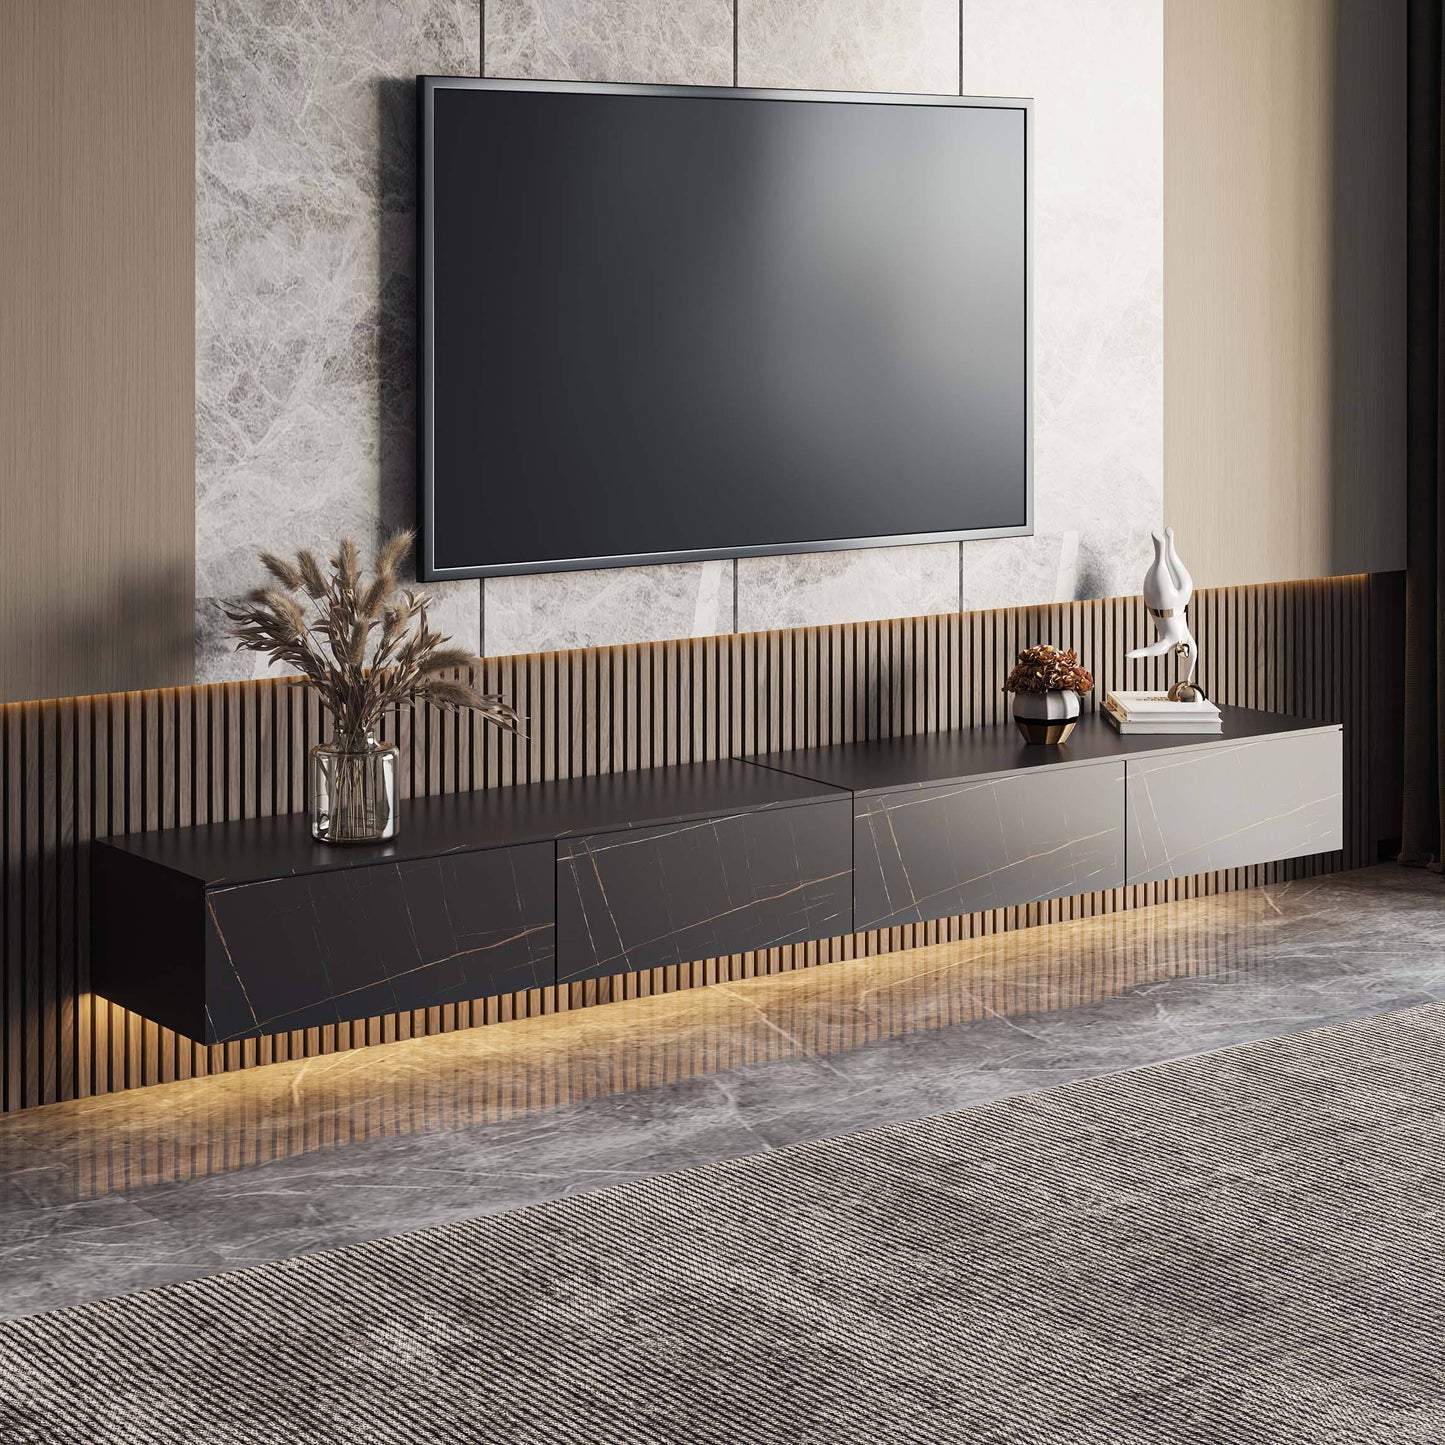 Modern Sleek Tv Stand | Wall-Mounted, Pinewood Drawers | Black/White Sintered Stone Floating Tv Console, Fully-Assembled